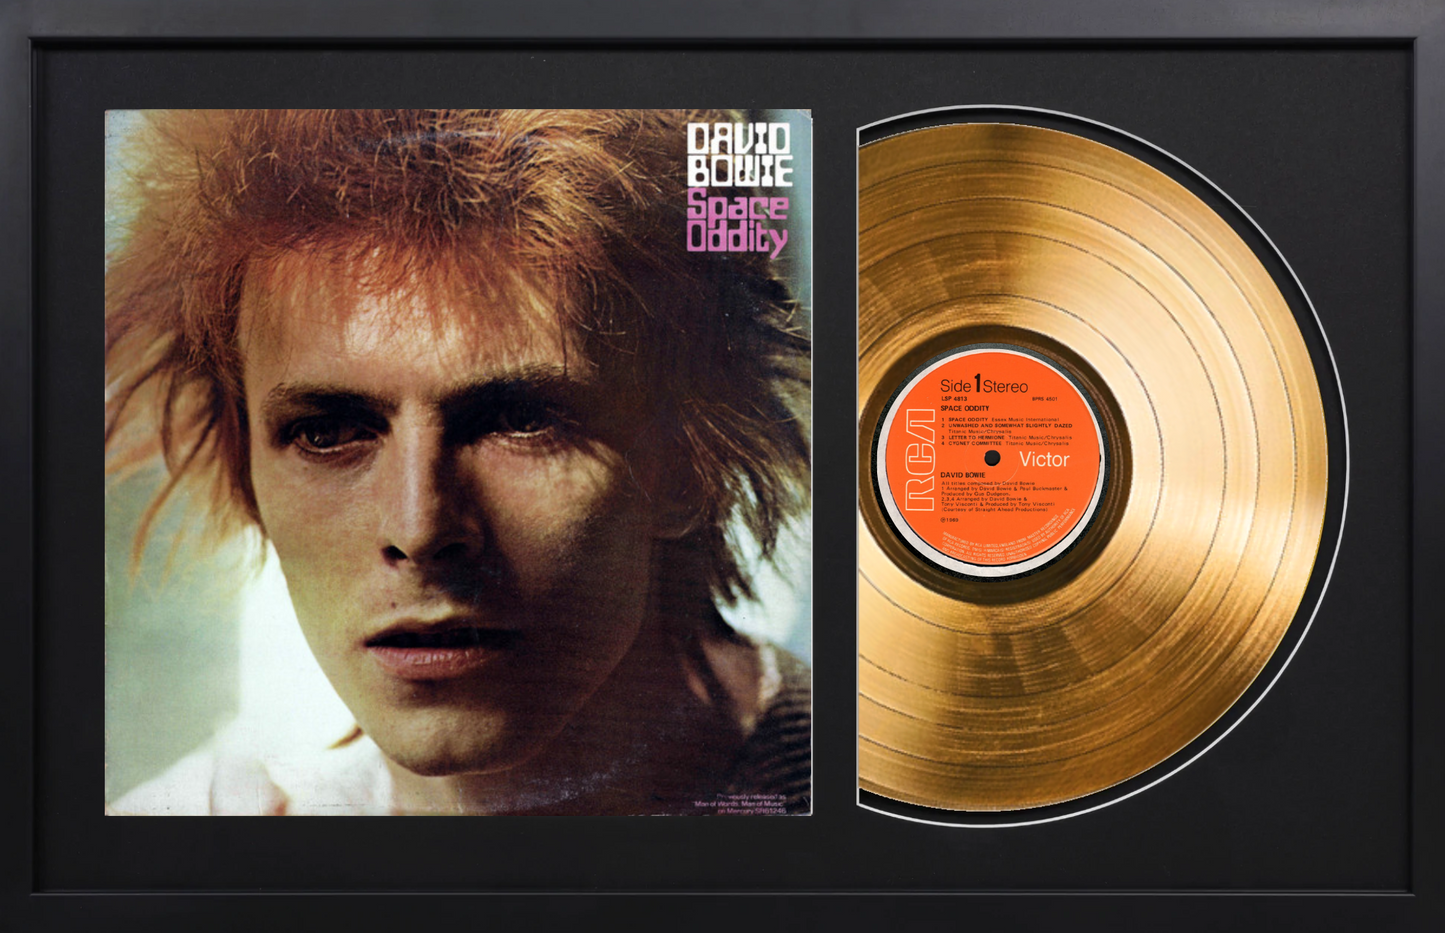 David Bowie - Space Oddity - 14K Gold Plated Vinyl